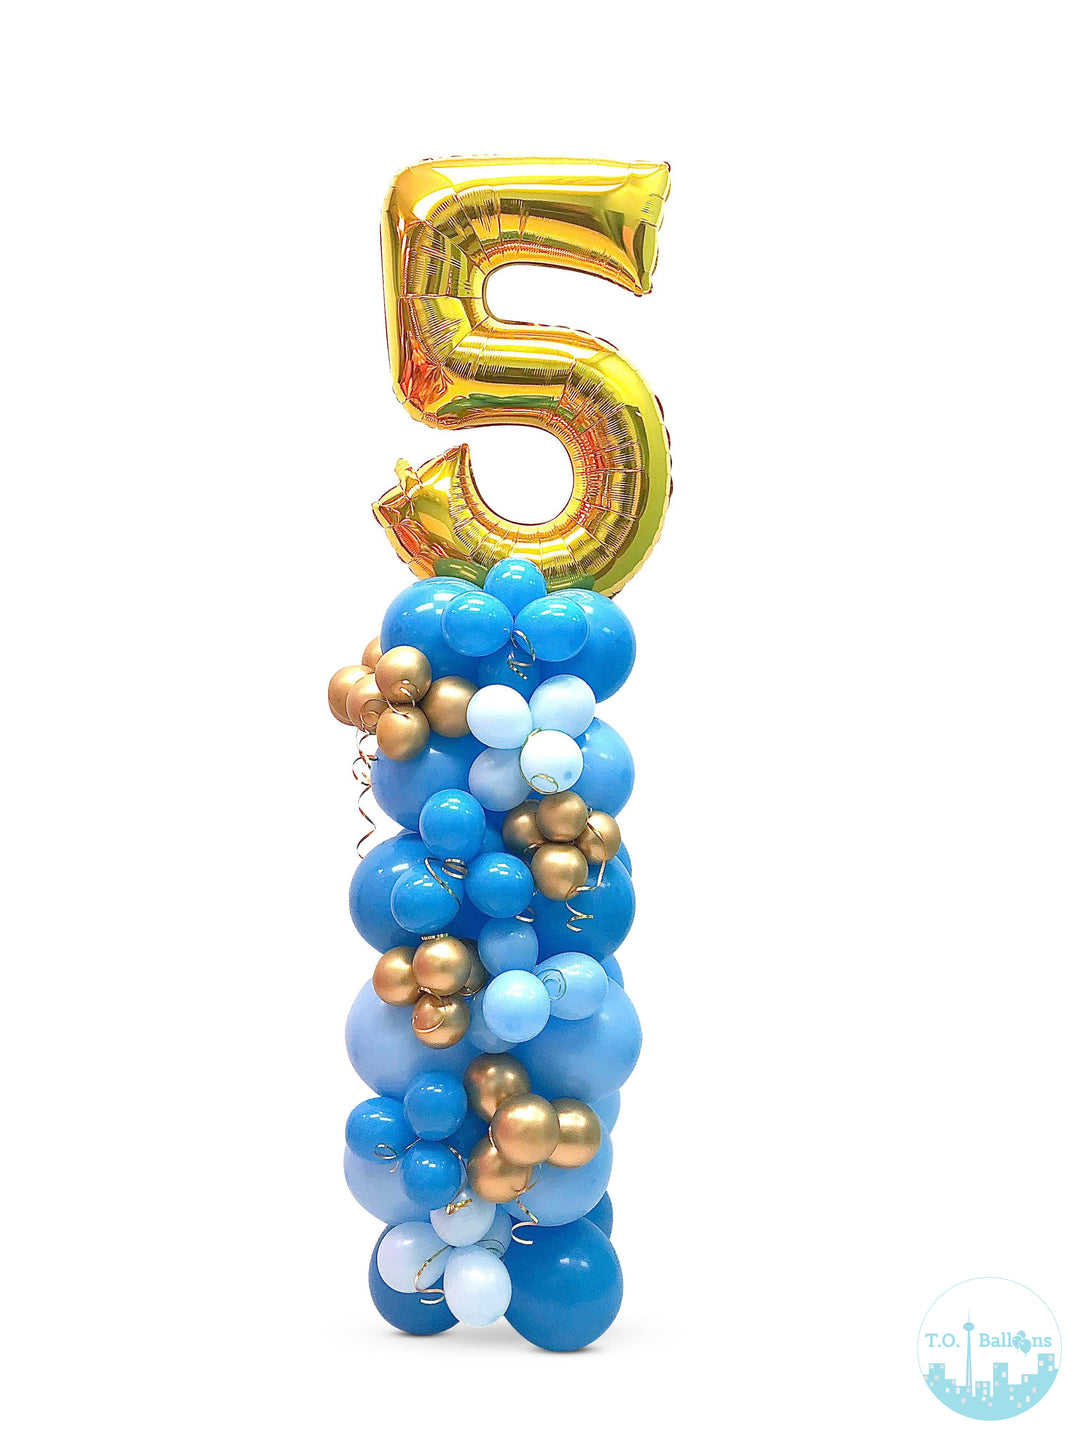 5ft AIR FILLED NUMBER BALLOON STANDS (sold individually)